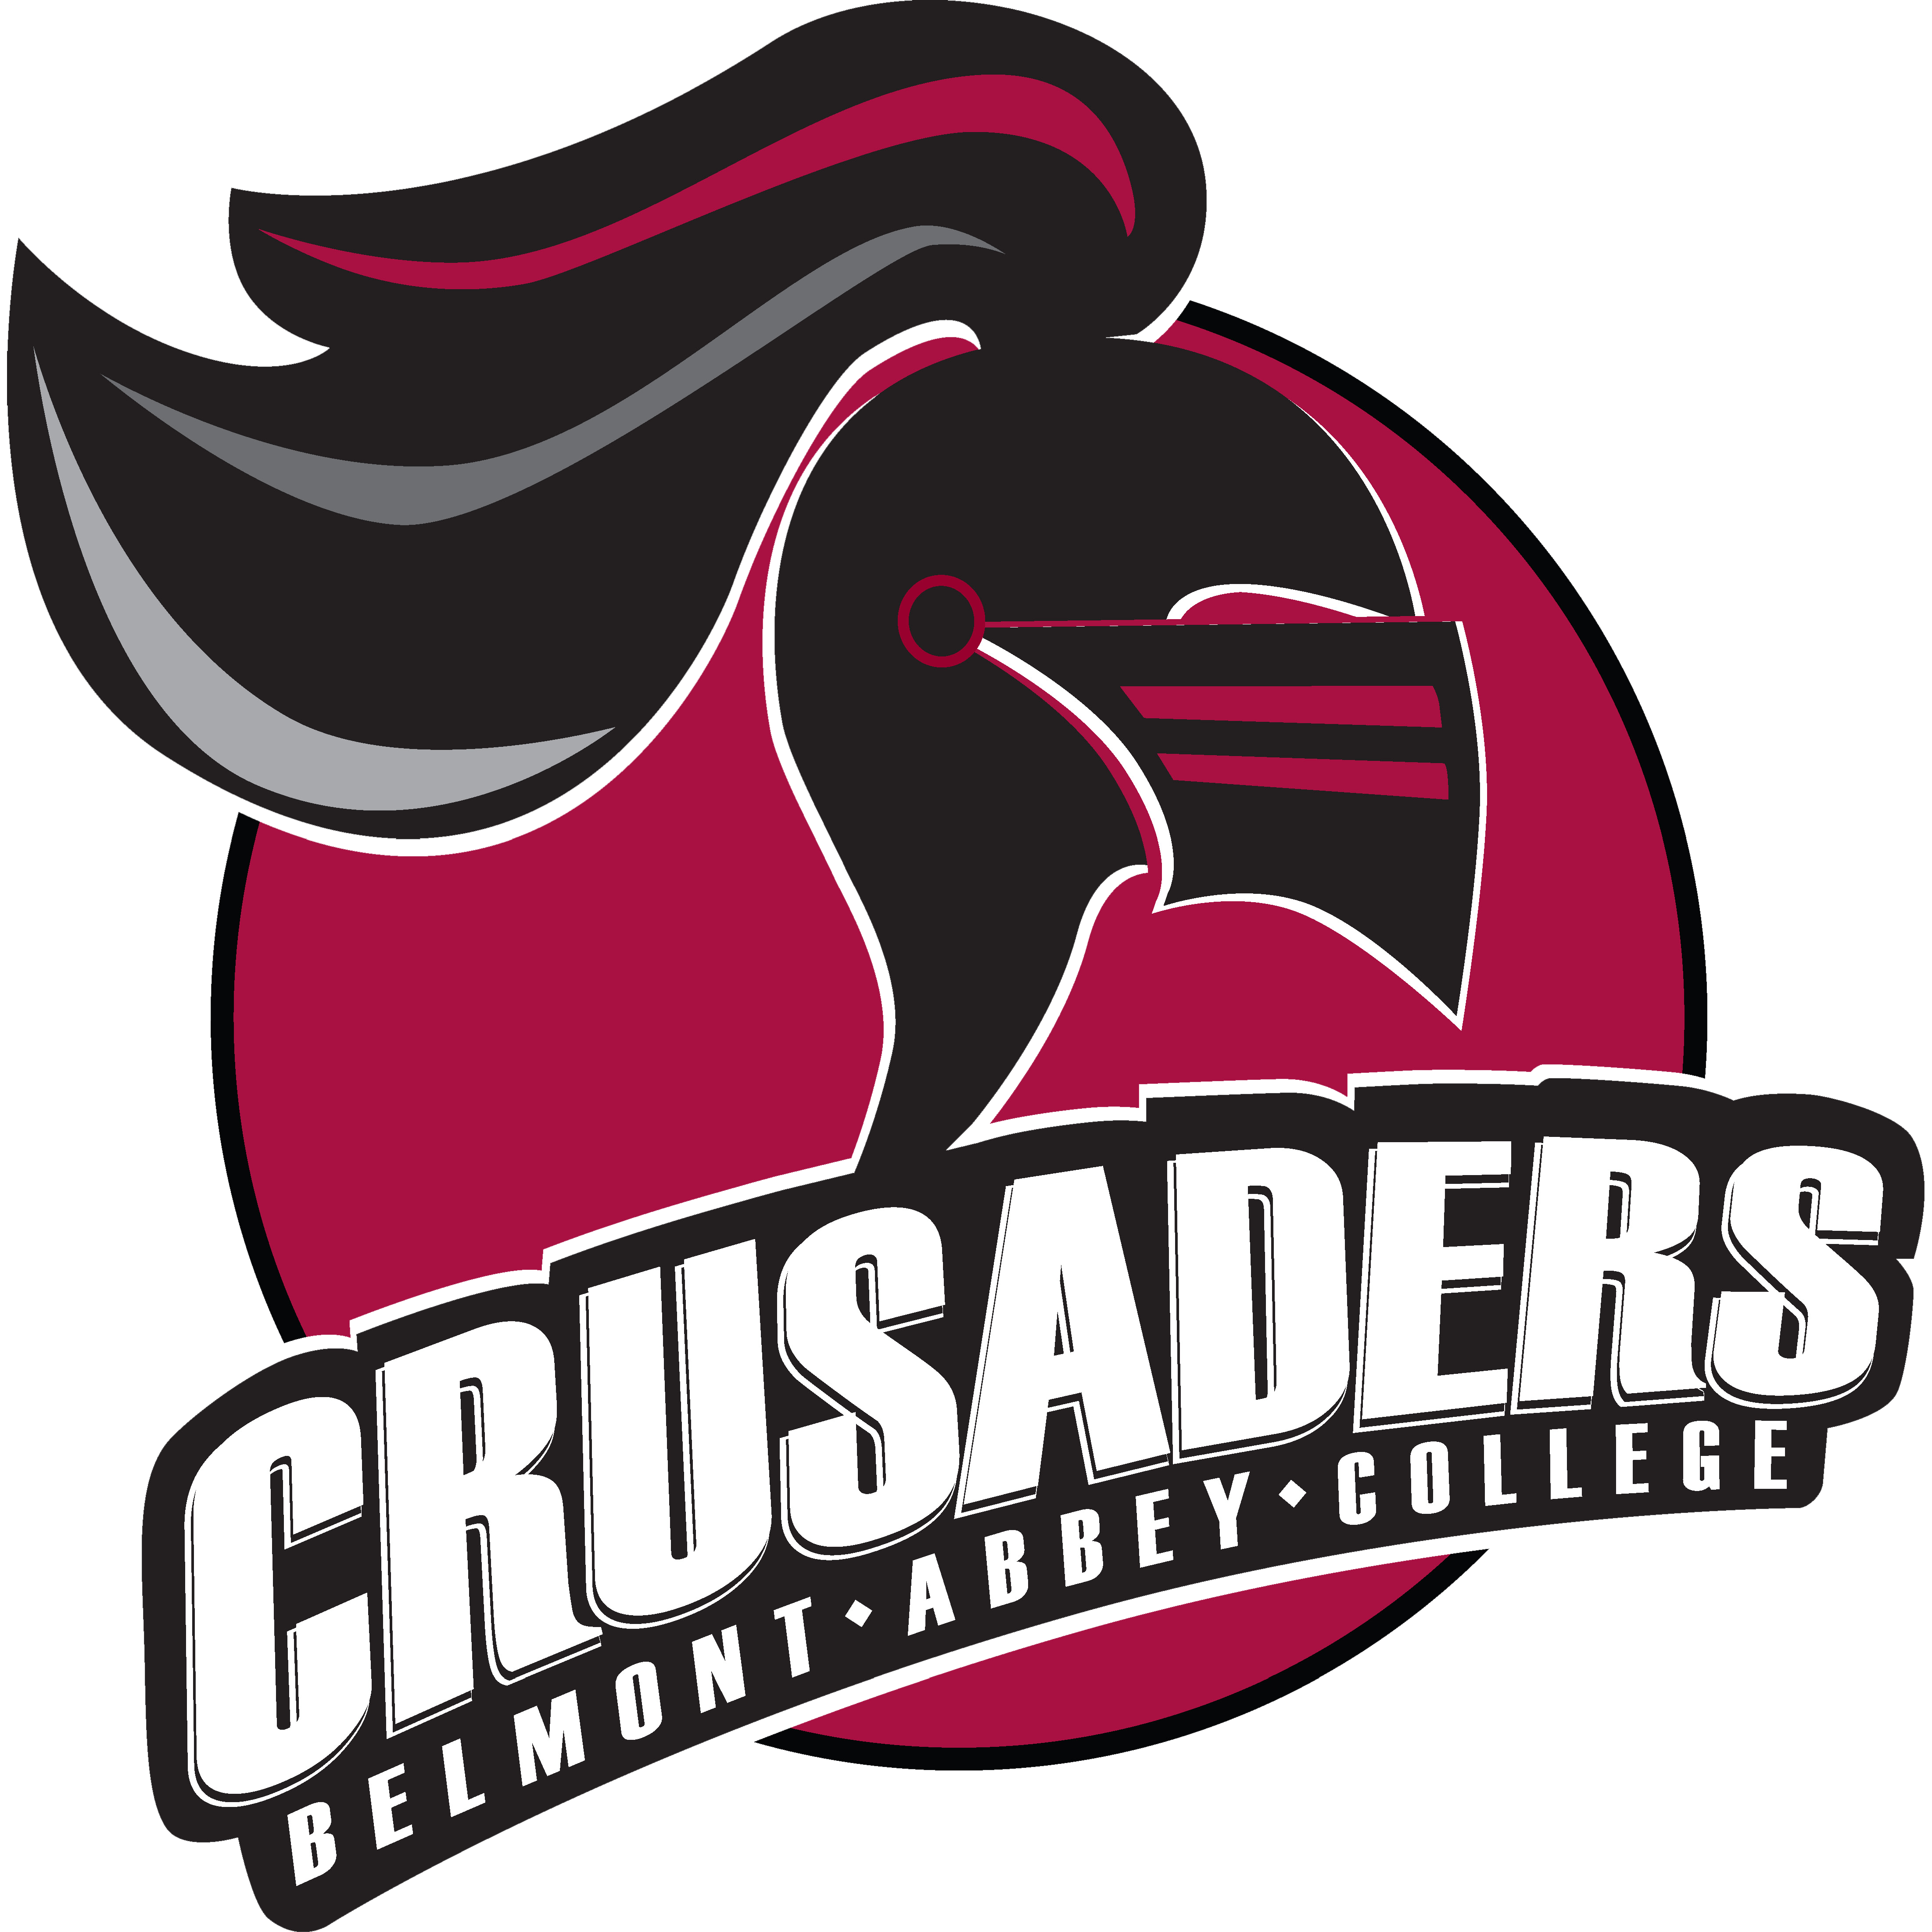 Crusaders Soccer Logo - Belmont Abbey Crusaders Mens College Soccer - Belmont Abbey News ...